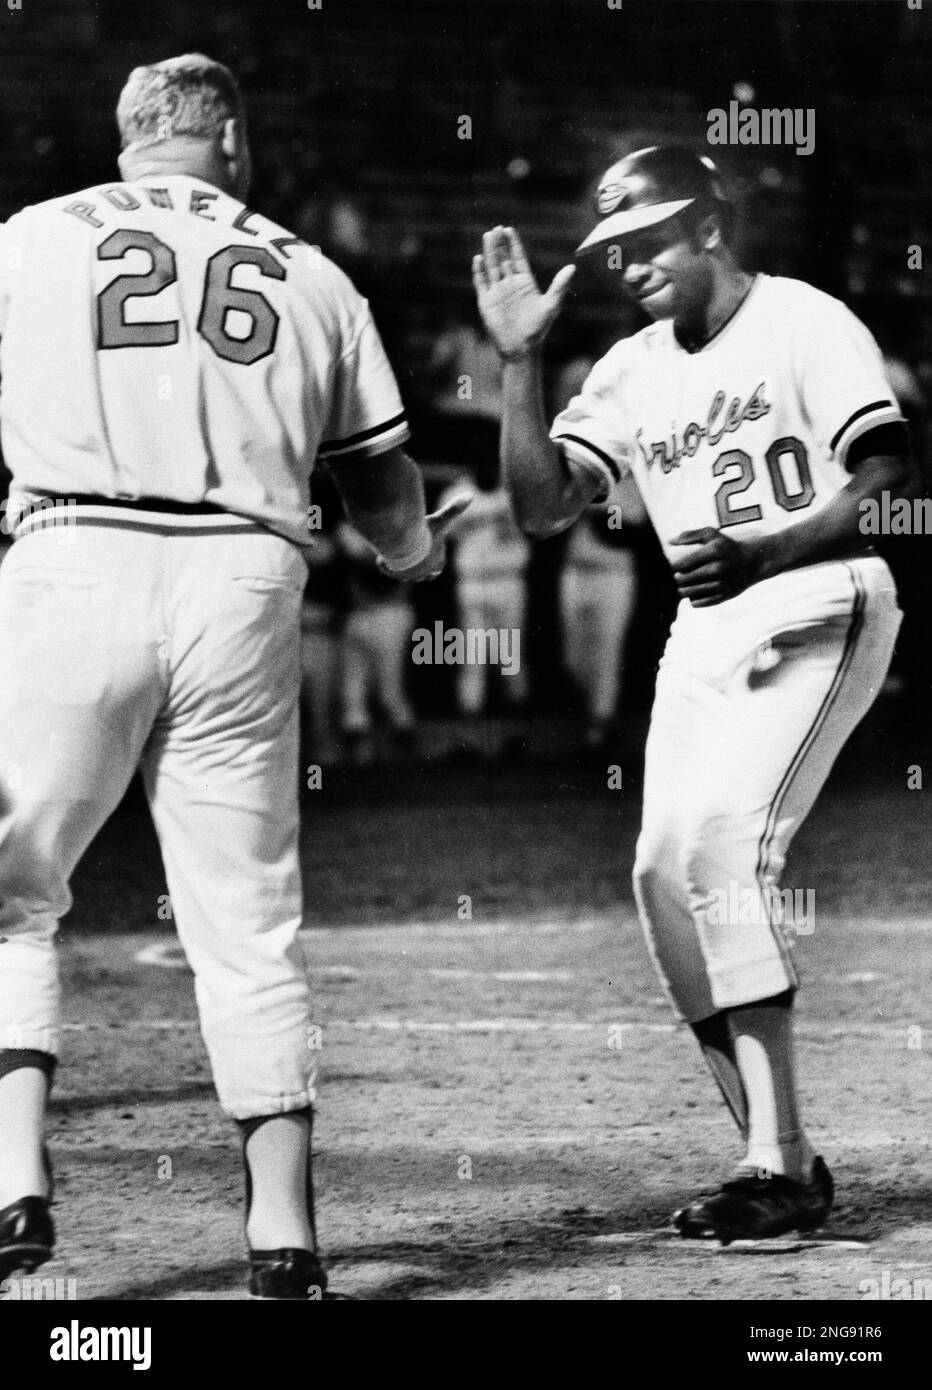 Baltimore Orioles outfielder Frank Robinson is congratulated at home plate  by teammate Boog Powell after hitting his 500th major league home run  during game against Detroit Tigers in Baltimore, Md., Sept. 13